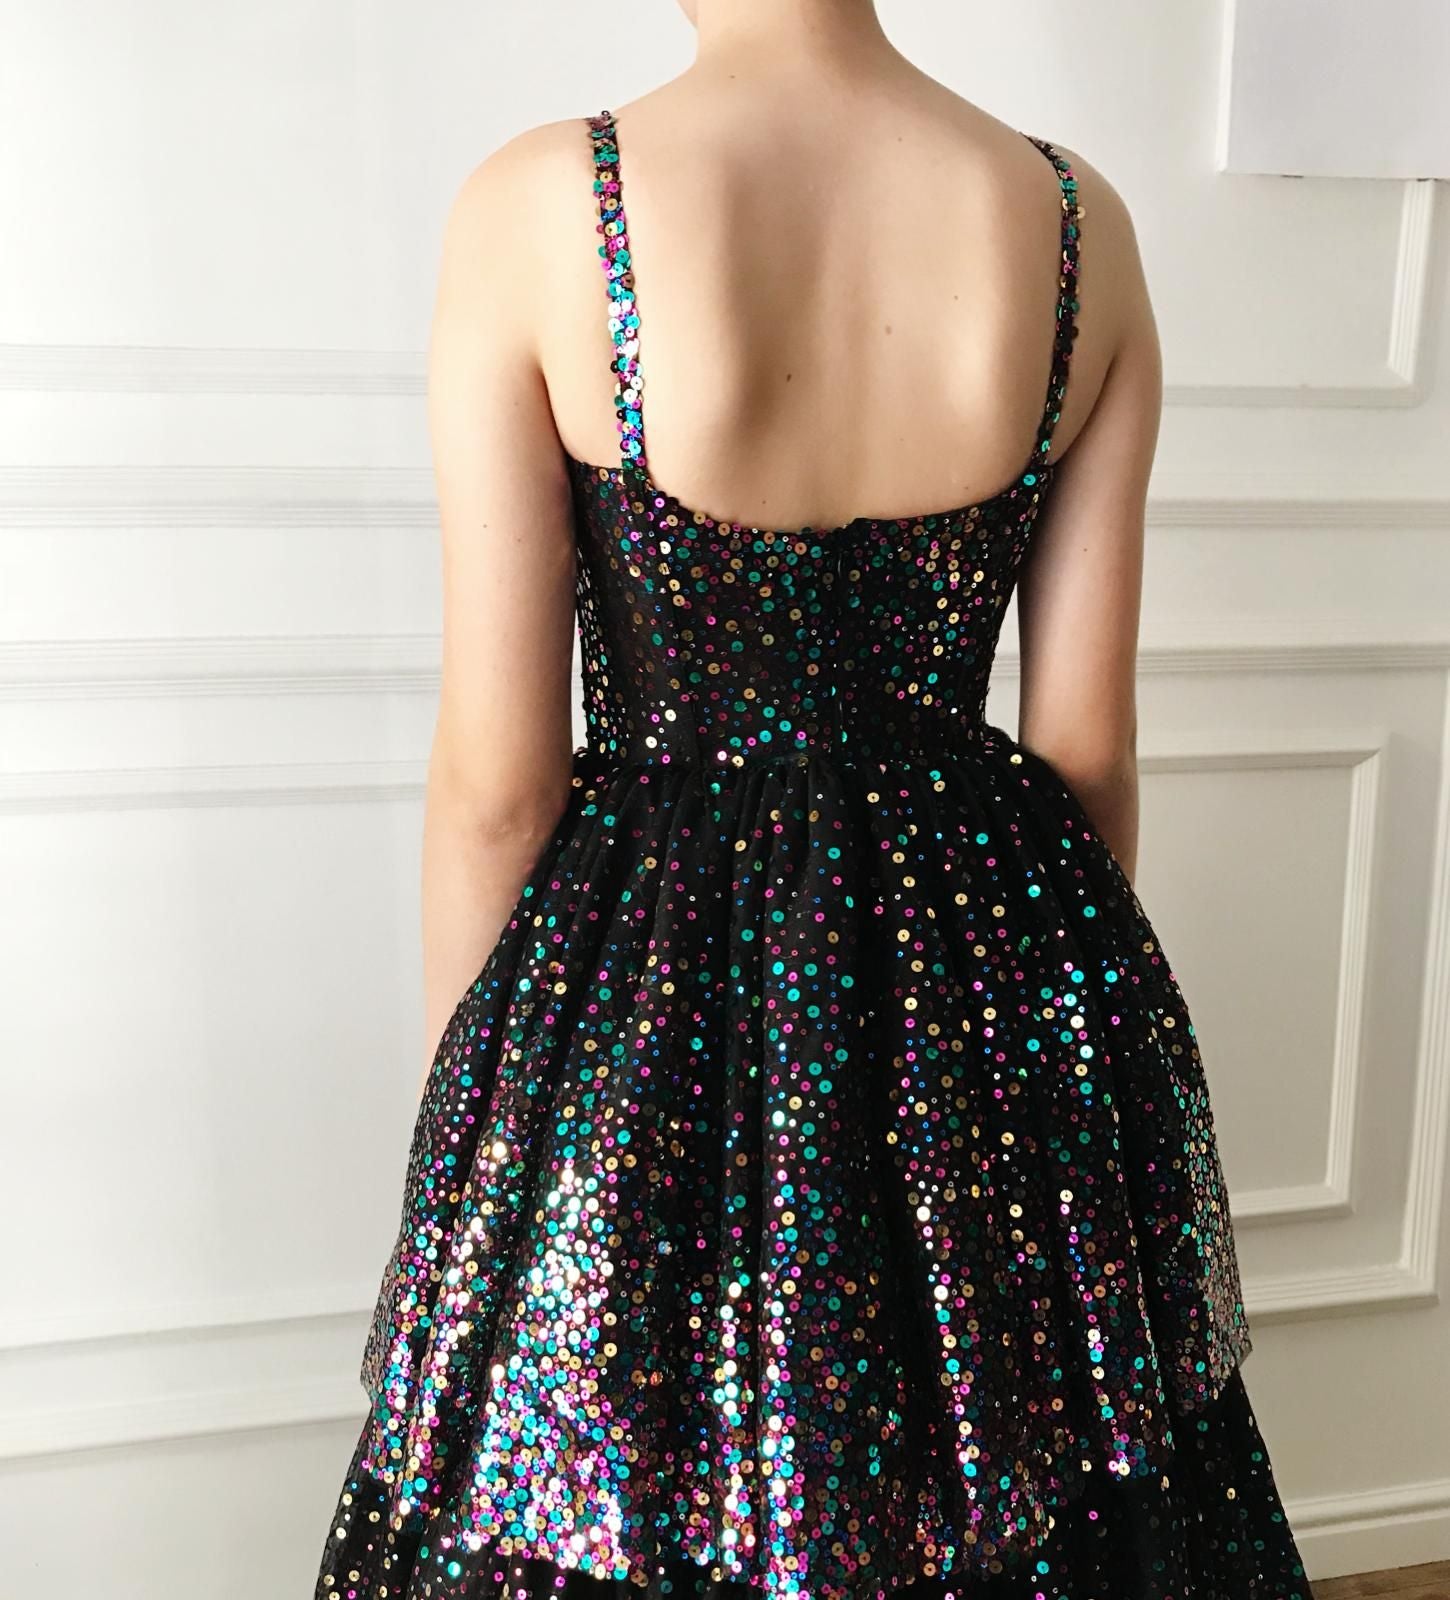 Black A-Line dress with spaghetti straps and sequins